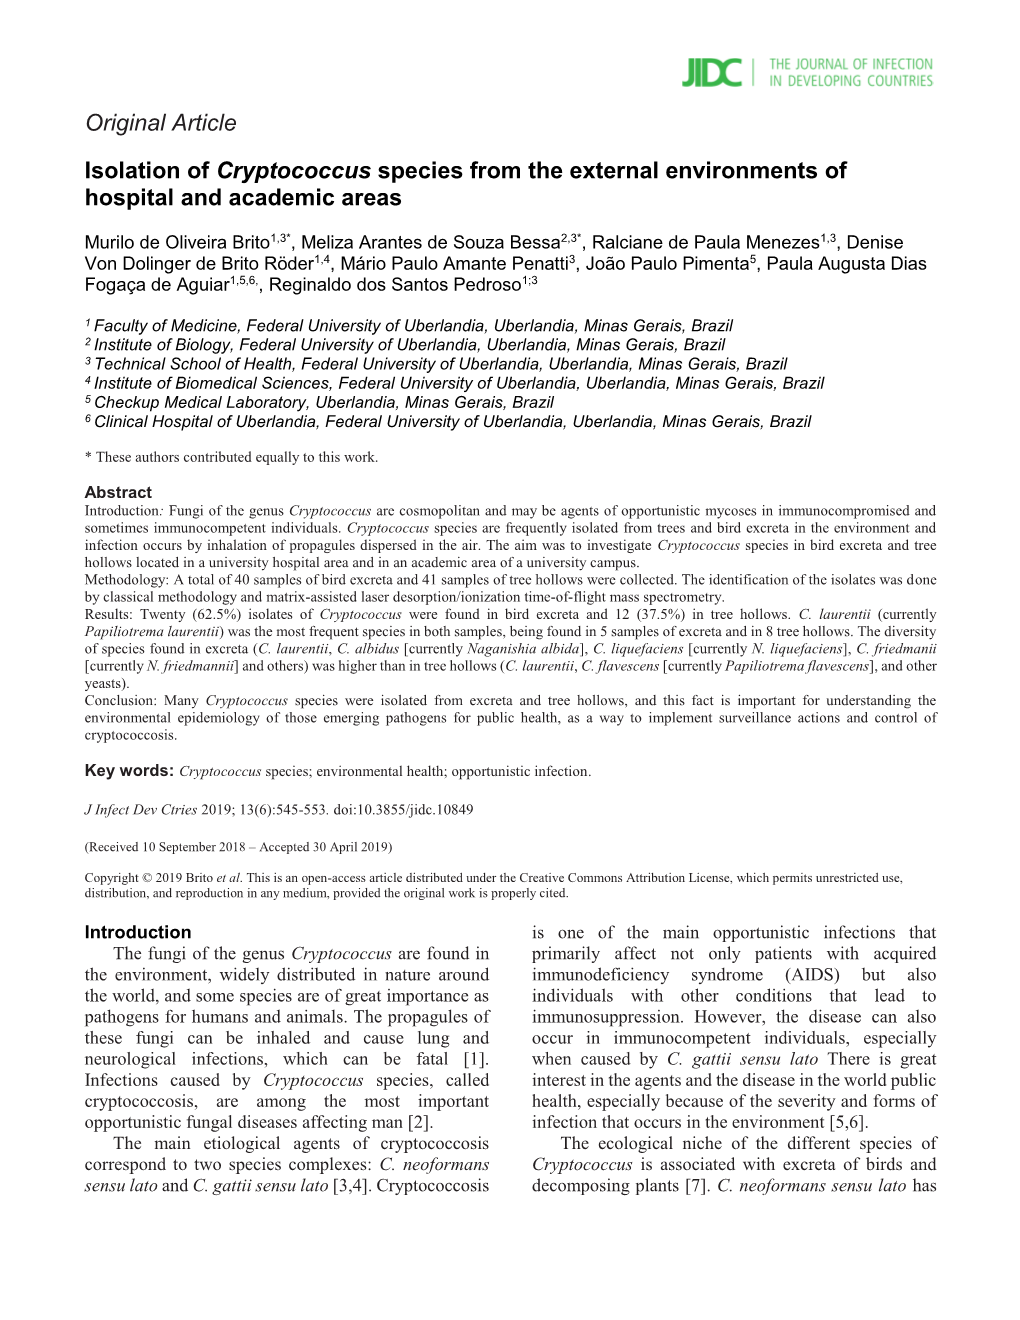 Isolation of Cryptococcus Species from the External Environments of Hospital and Academic Areas